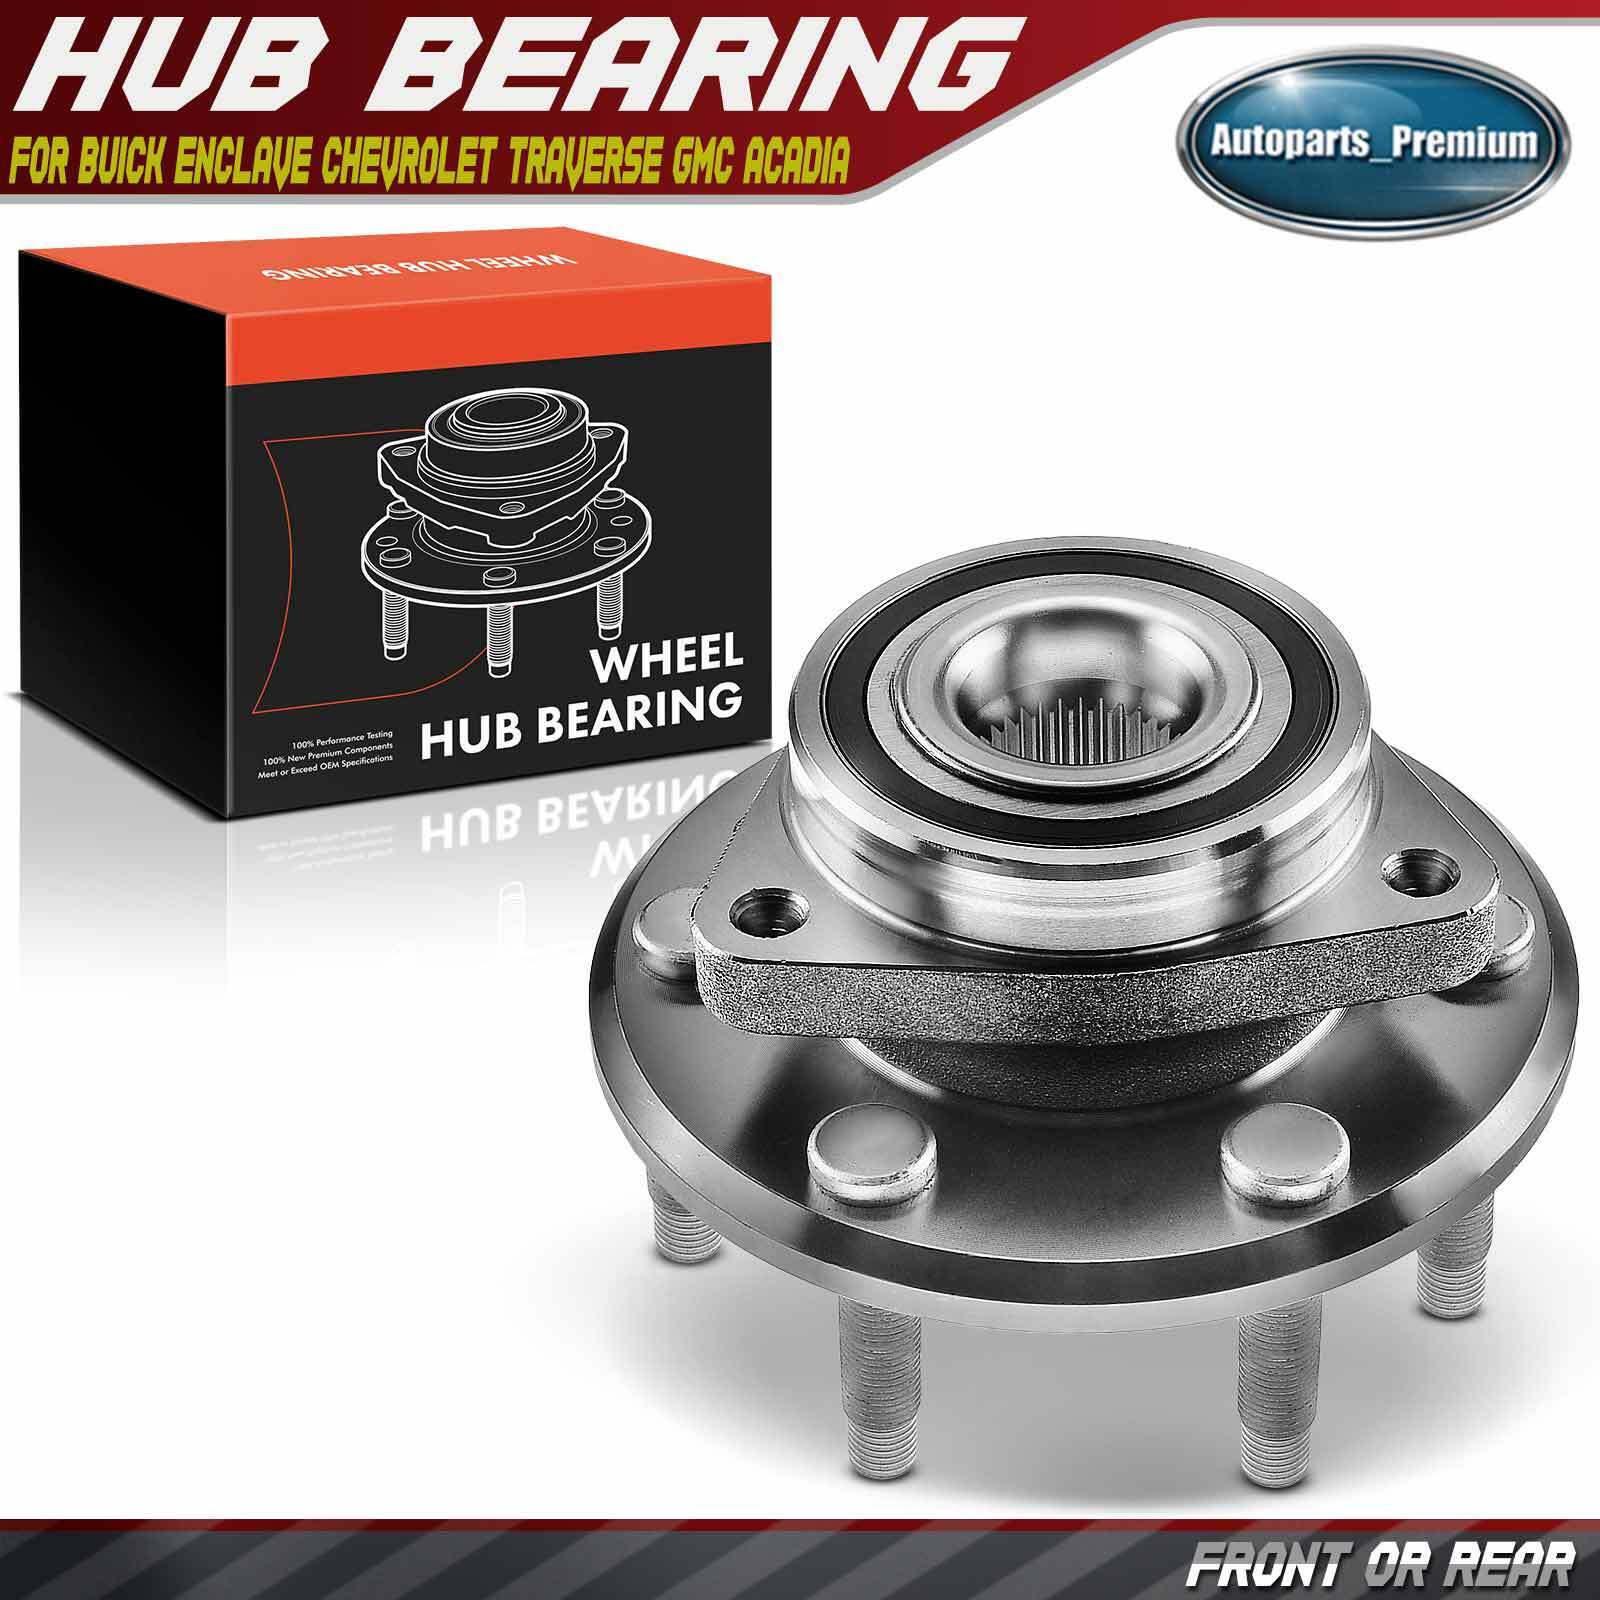 Front/Rear Wheel Bearing Hub For Buick Enclave Chevy Traverse GMC Acadia 3.6L